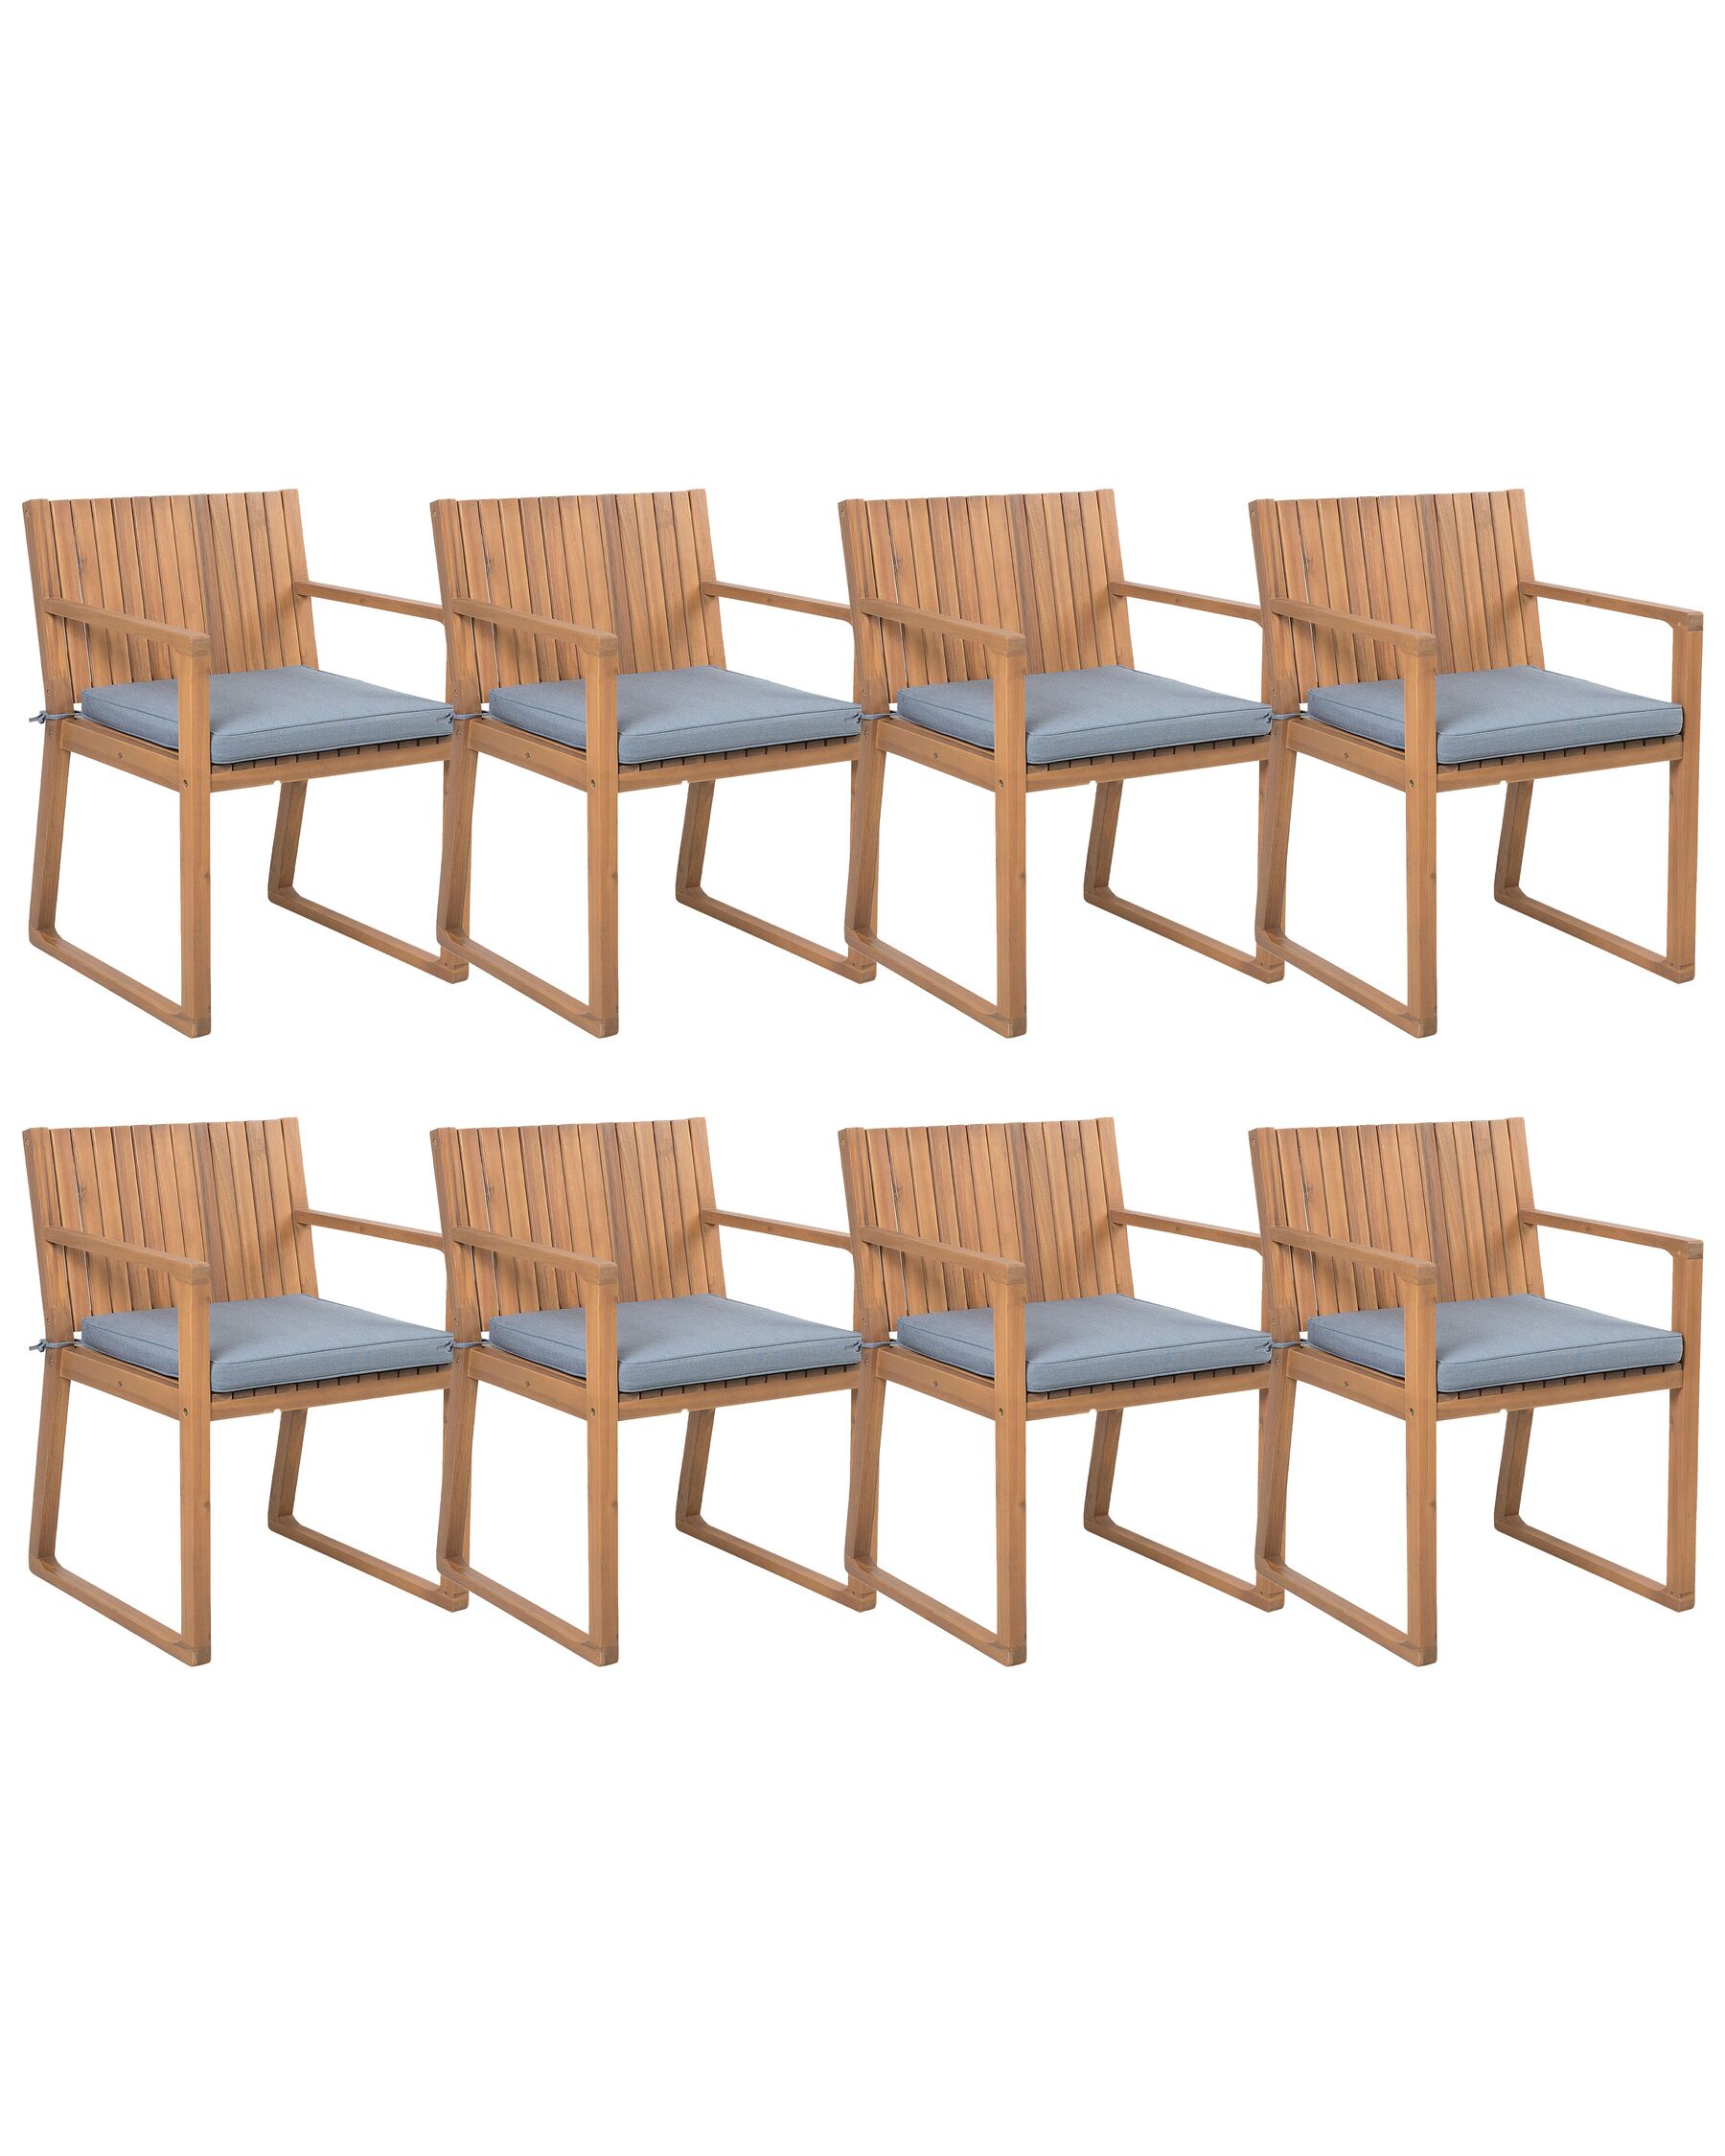 Set of 8 Acacia Wood Garden Dining Chairs with Blue Cushions SASSARI_746007